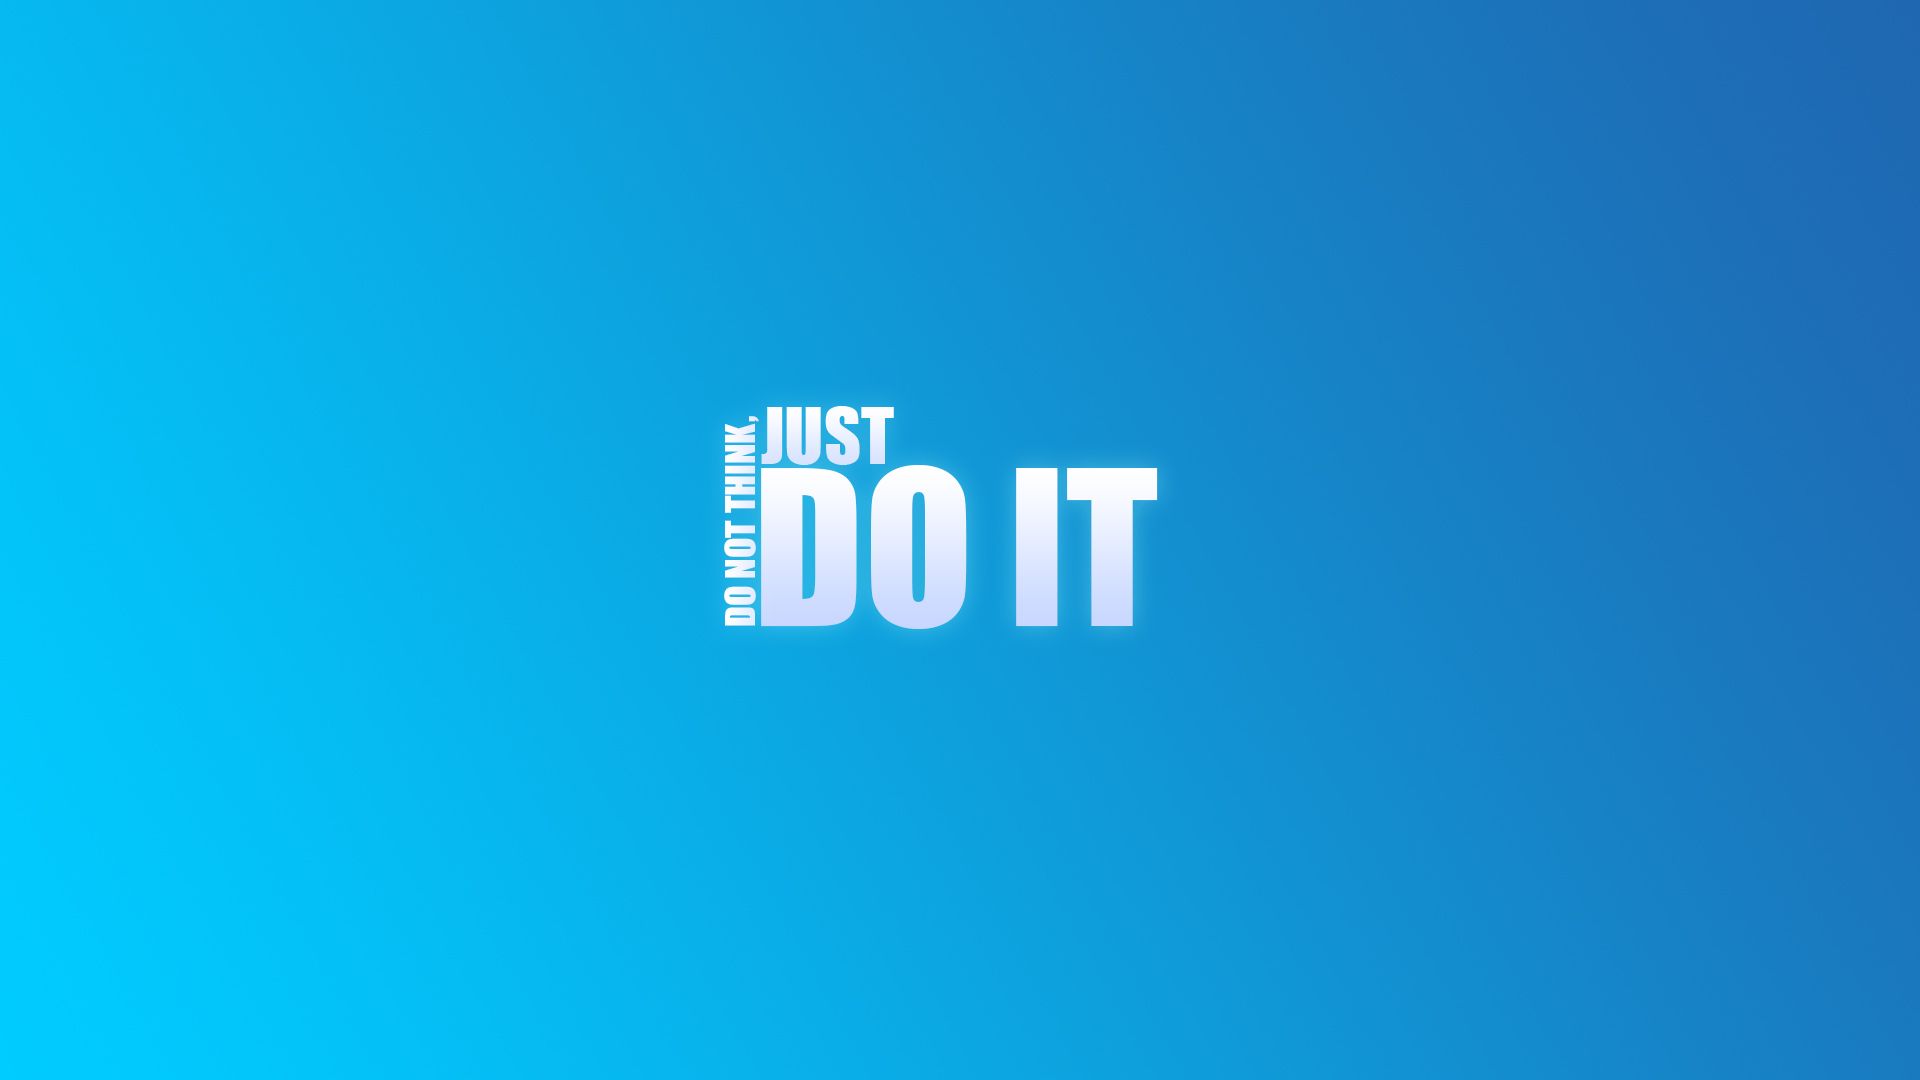 just do it quotes wallpaper